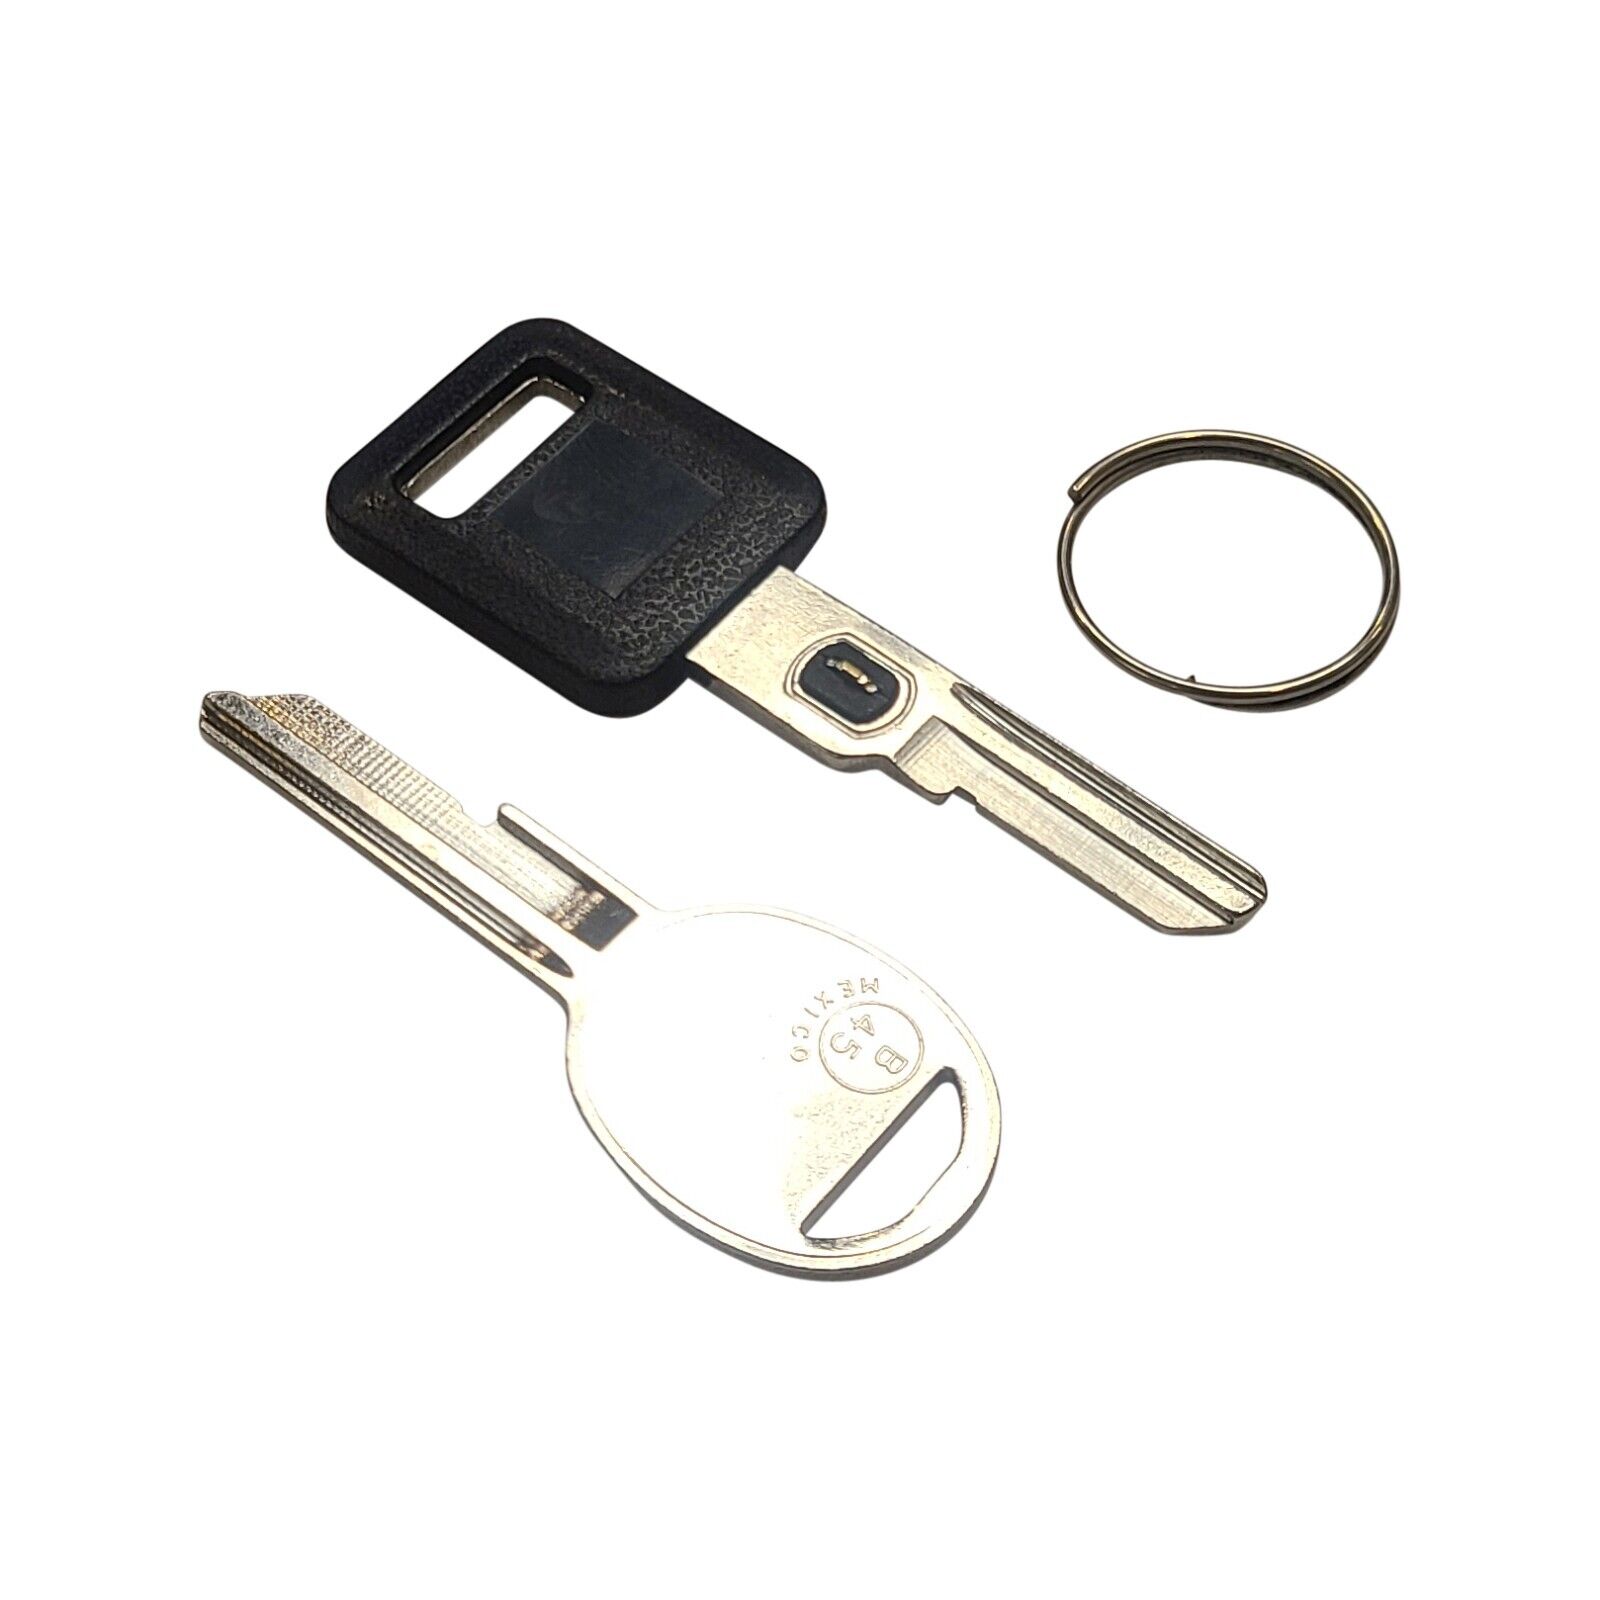 New Ignition VATS Resistor Key B62-P5 For Gm Vehicles And H Door Key B45